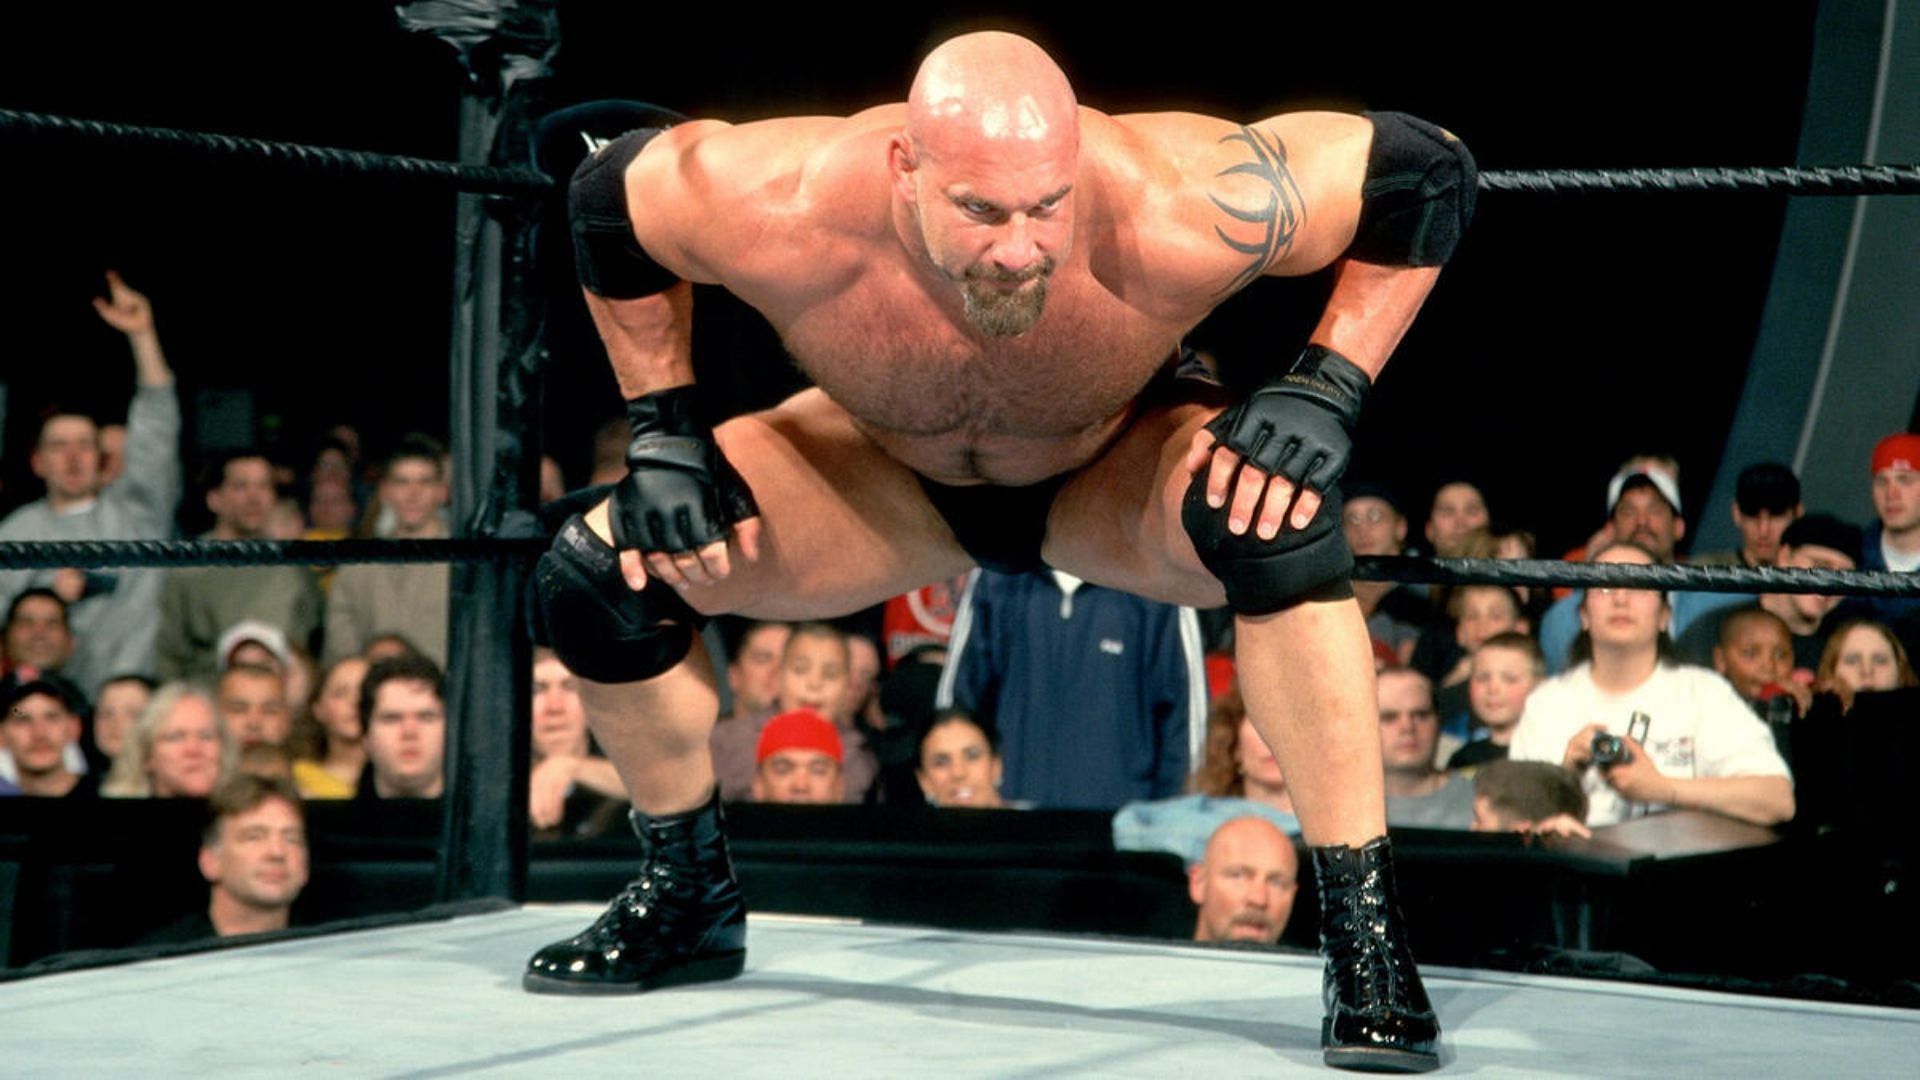 Goldberg had one of the longest undefeated streaks in history